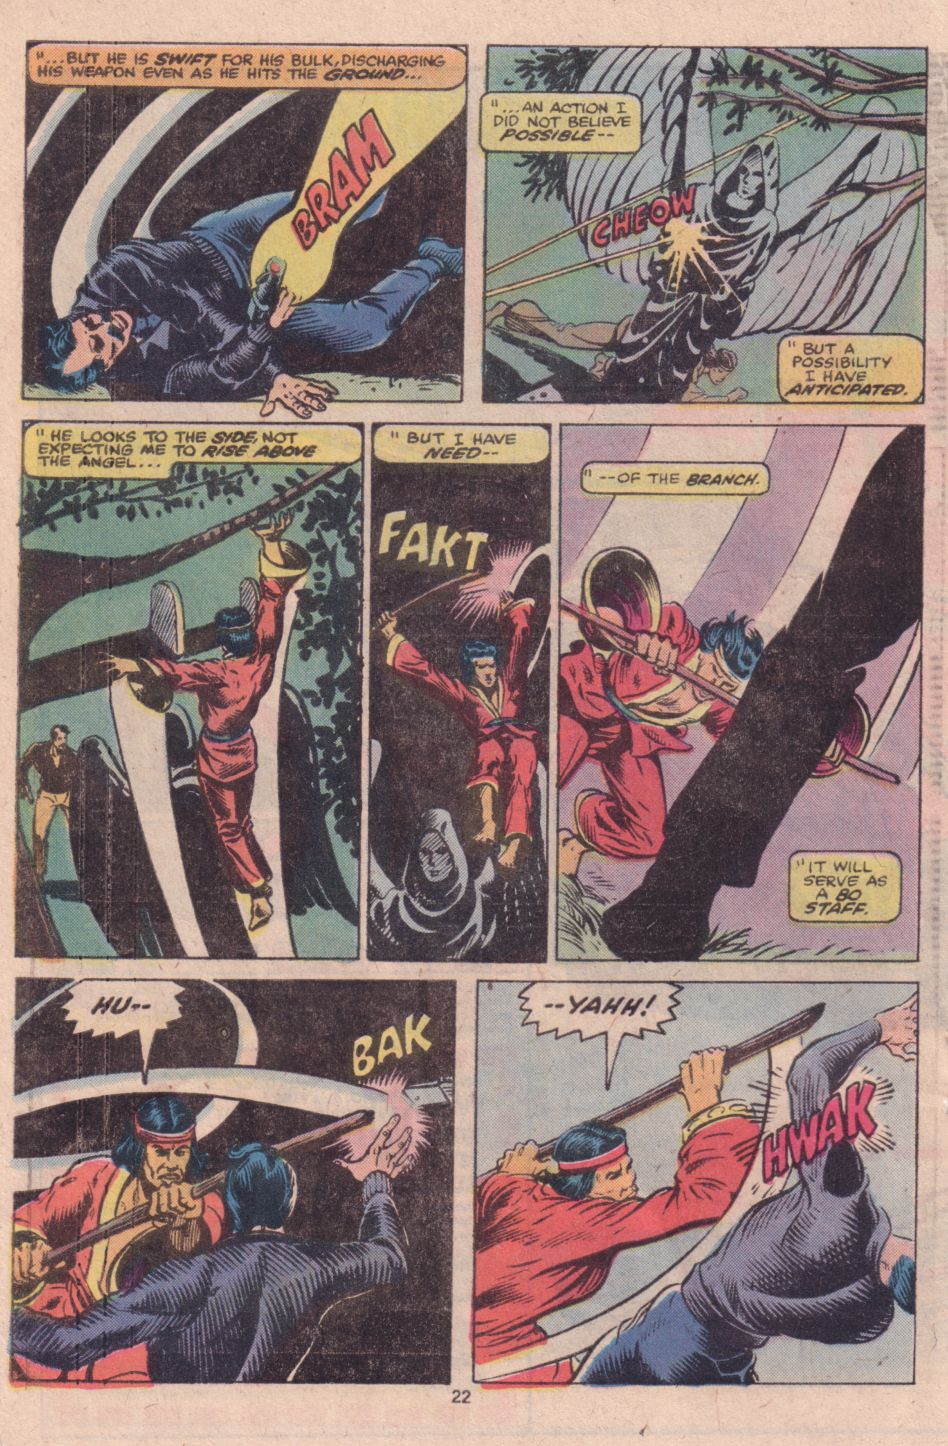 What If? (1977) issue 16 - Shang Chi Master of Kung Fu fought on The side of Fu Manchu - Page 17